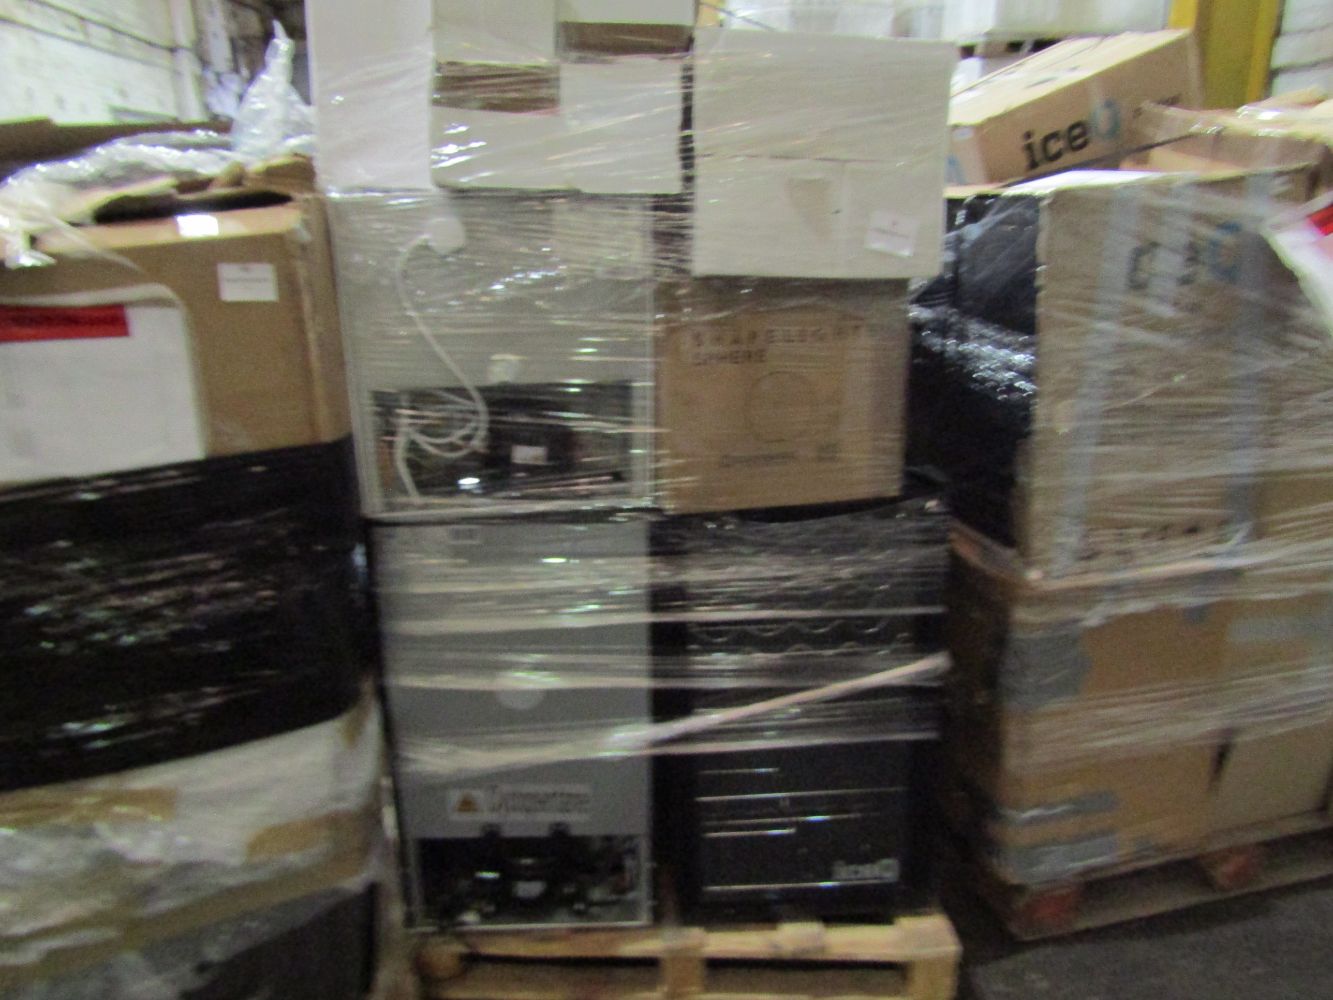 Pallets of Overstock and returns items